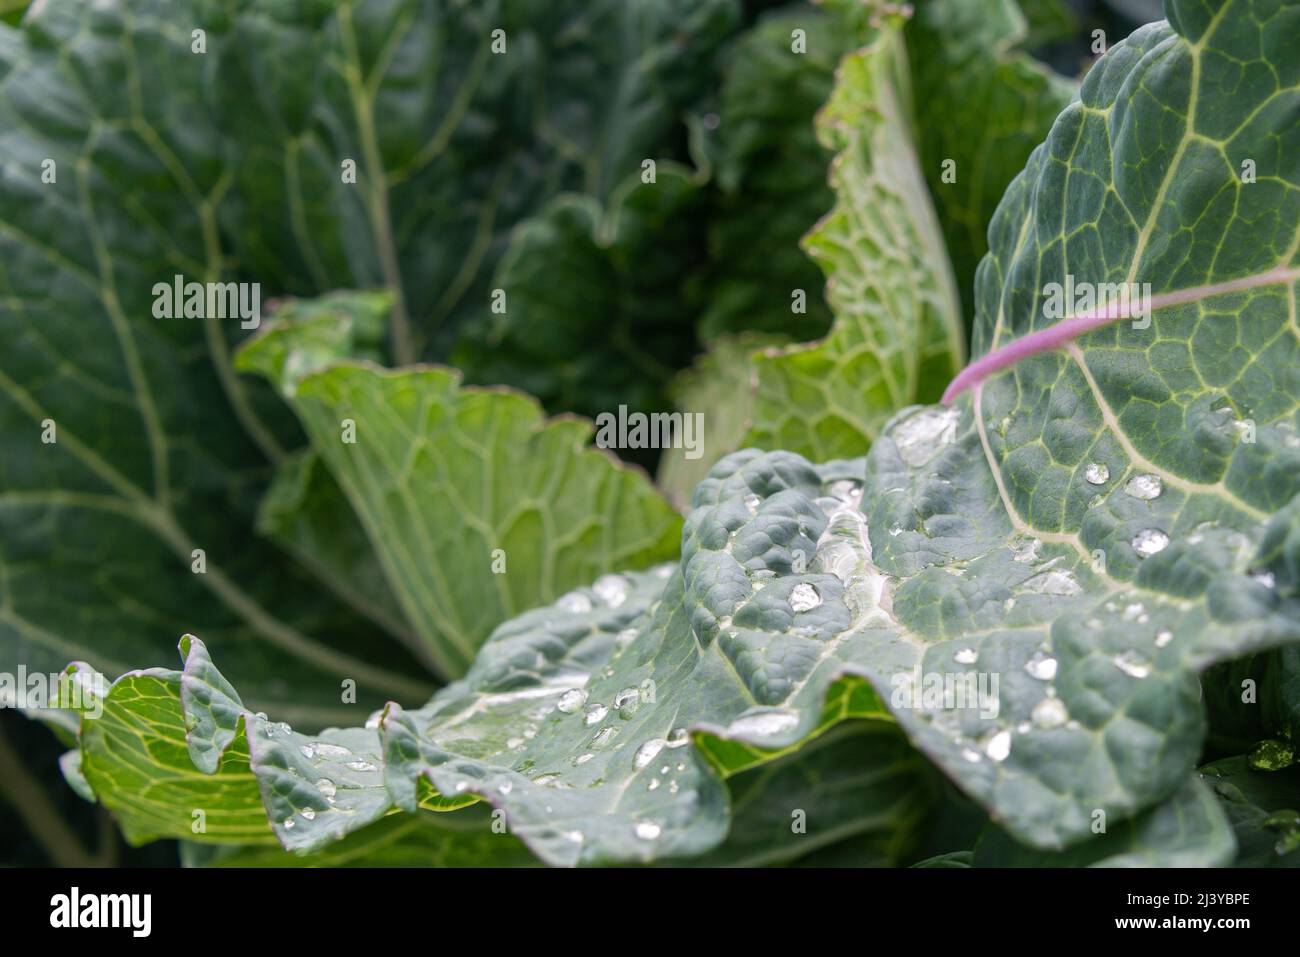 A large head of green cabbage growing in an organic garden. The large vegetable ball is deep green with the sun shining on it. The center is a lighter Stock Photo